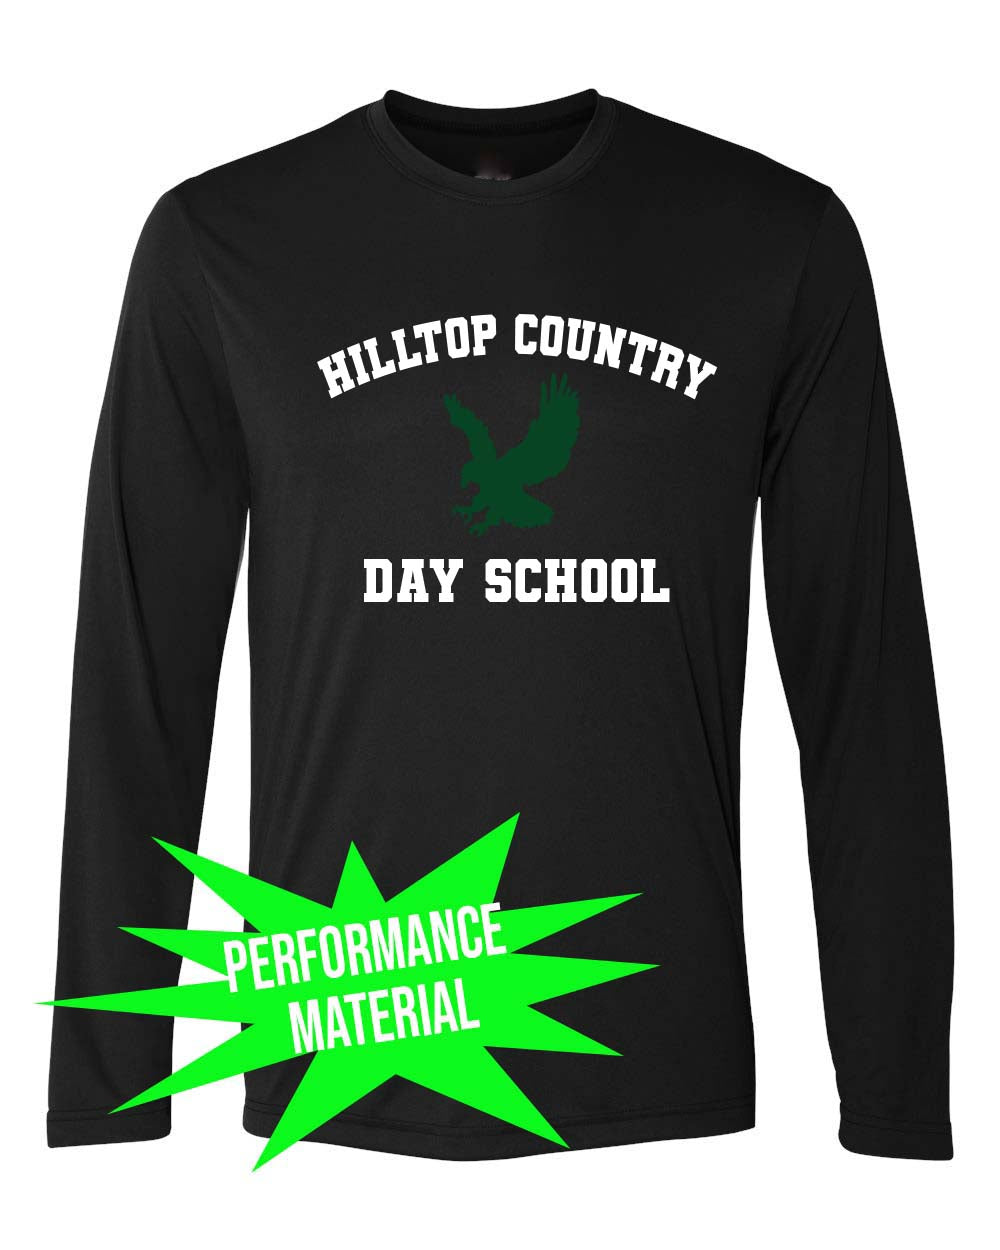 Hilltop Country Day School Performance Material Design 1 Long Sleeve Shirt